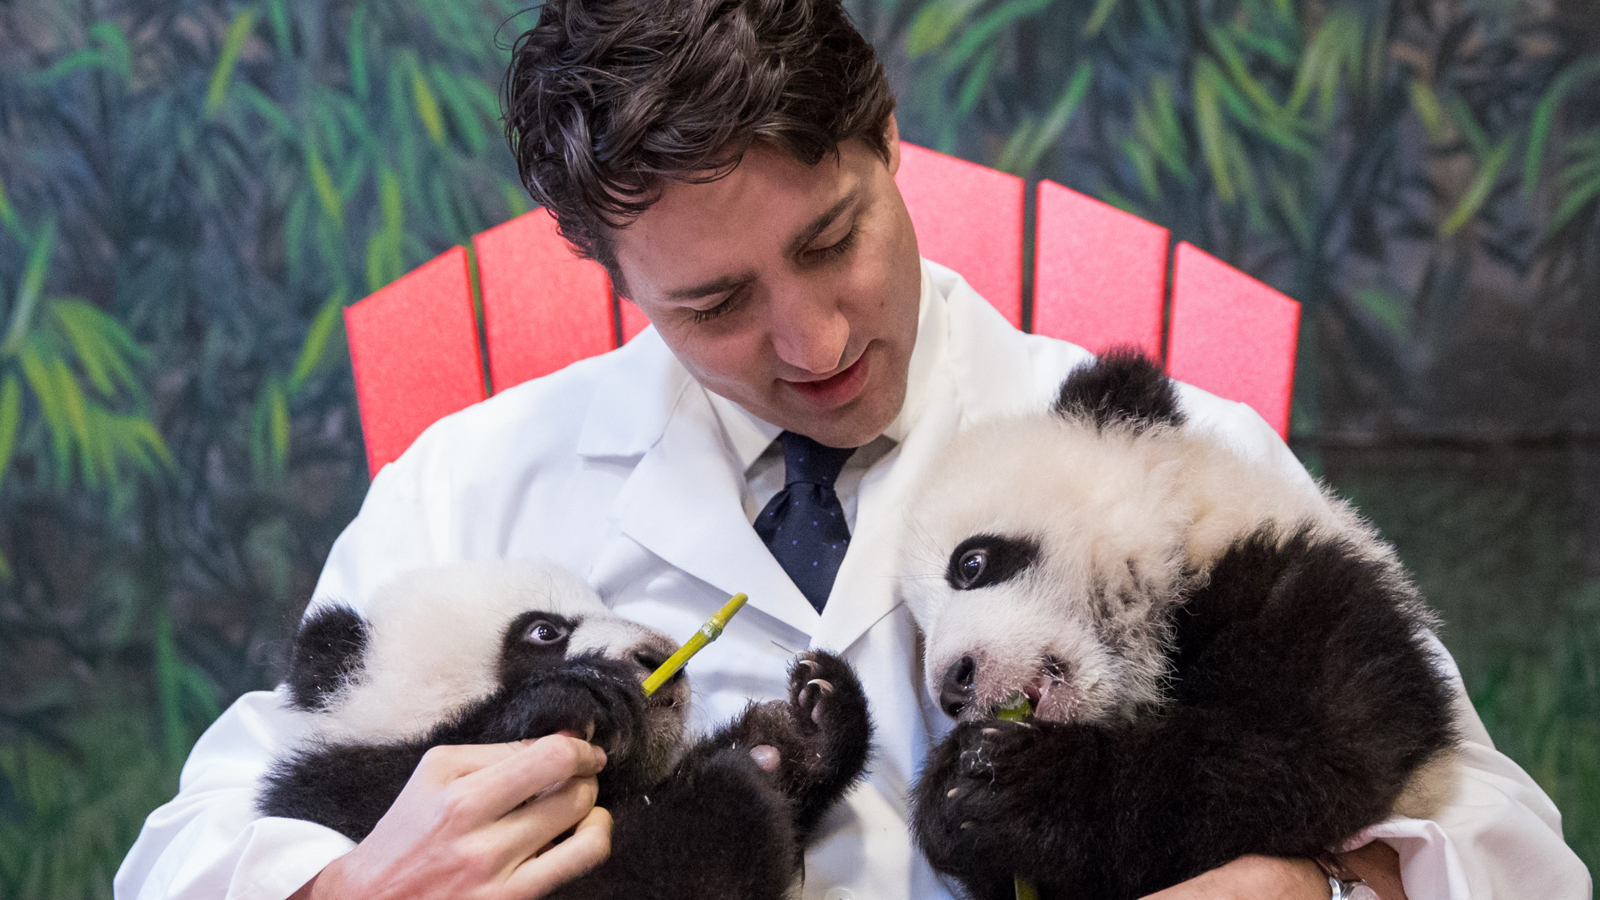 A 2016 photograph of Canadian prime minister Justin Trudeau holding Toronto Zoo’s panda cubs Jia Panpan and Jia Yueyue.